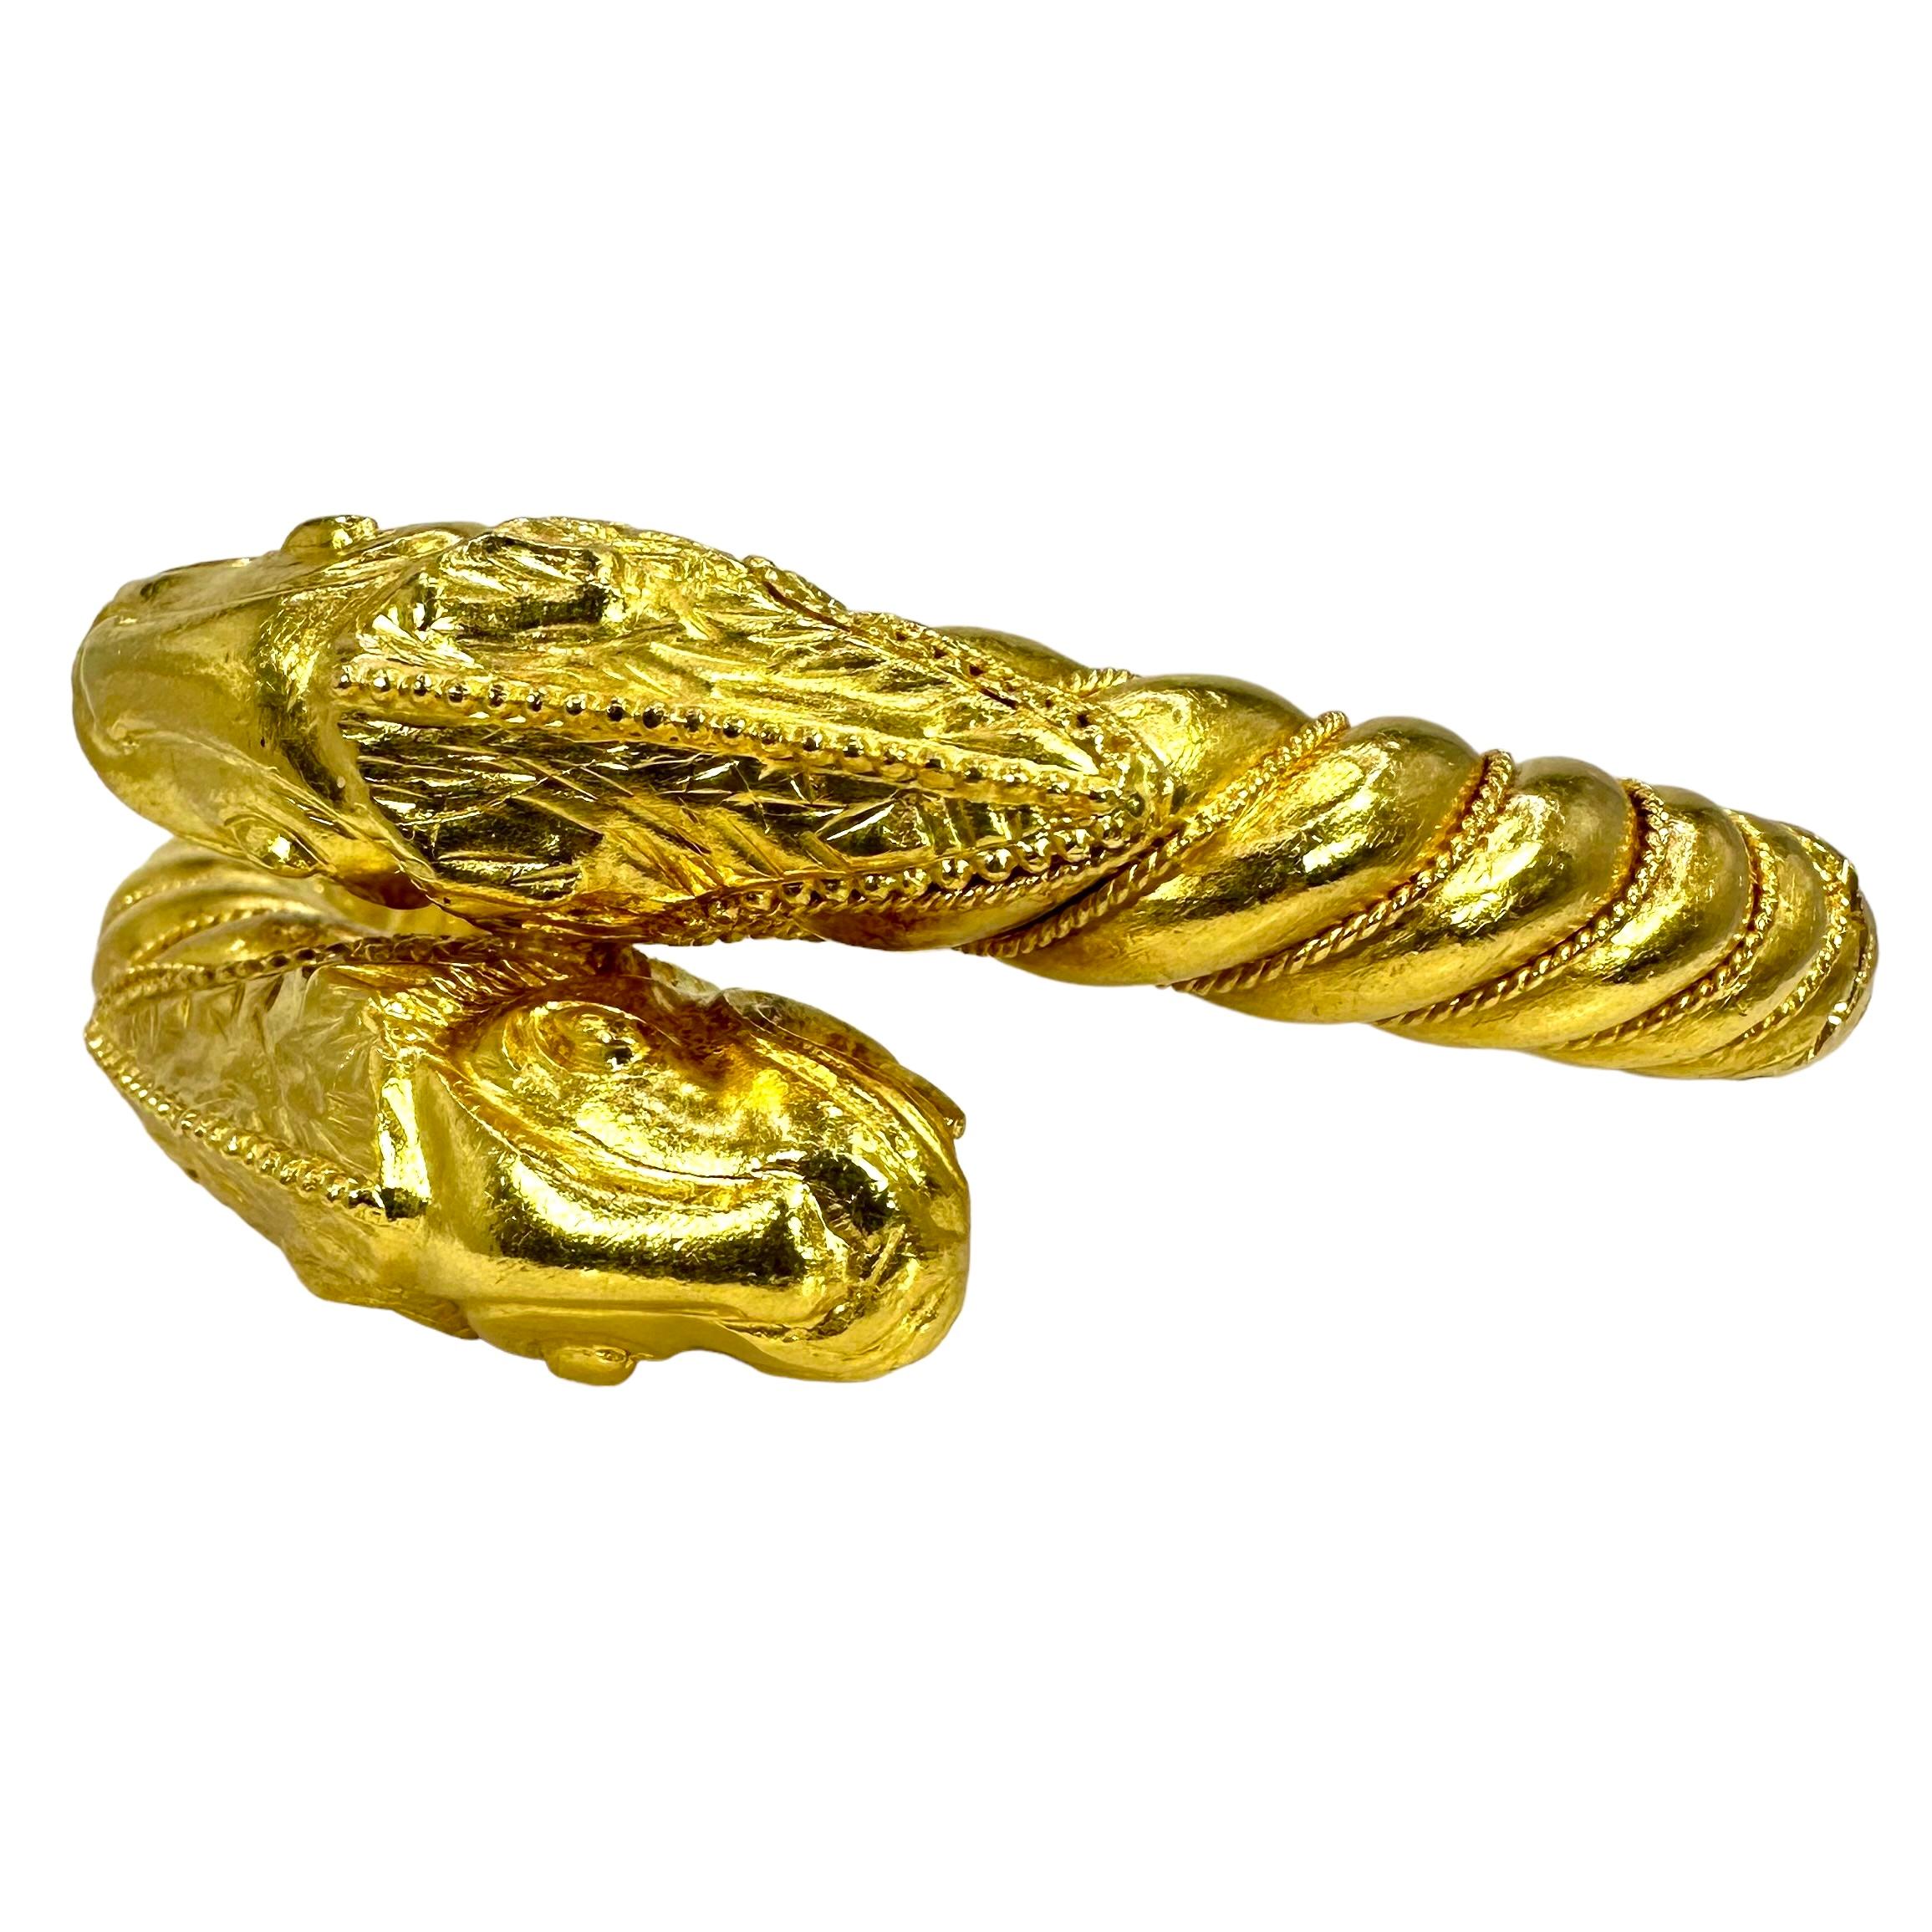 Classical Greek Double Headed Mythical Creature Bypass Cuff Bracelet in 22K Gold by Lalaounis  For Sale